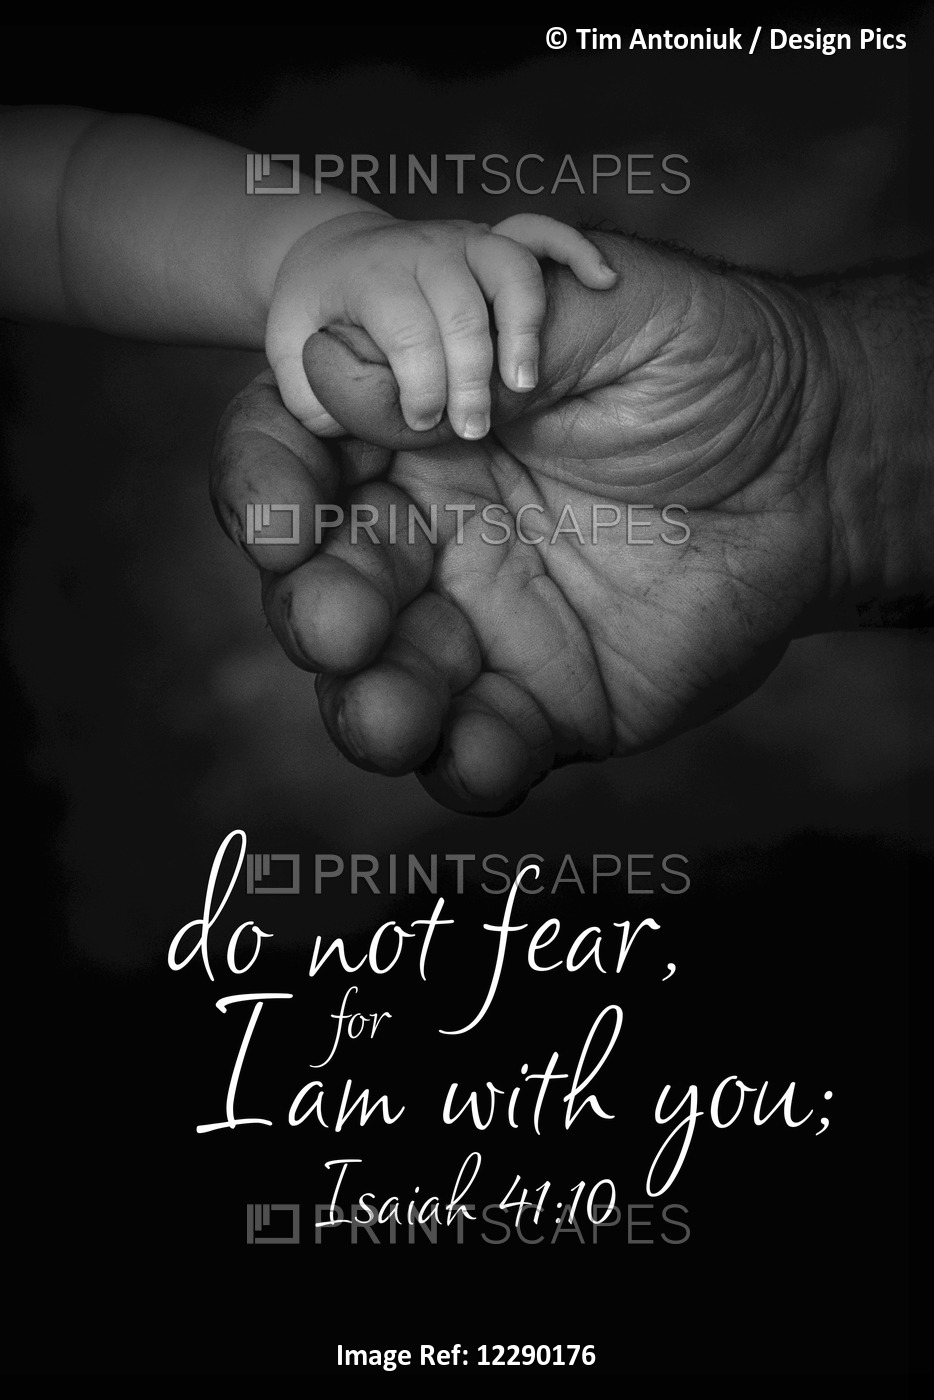 Image Of A Baby's Hand Holding A Large Adult Hand On A Black Background With ...